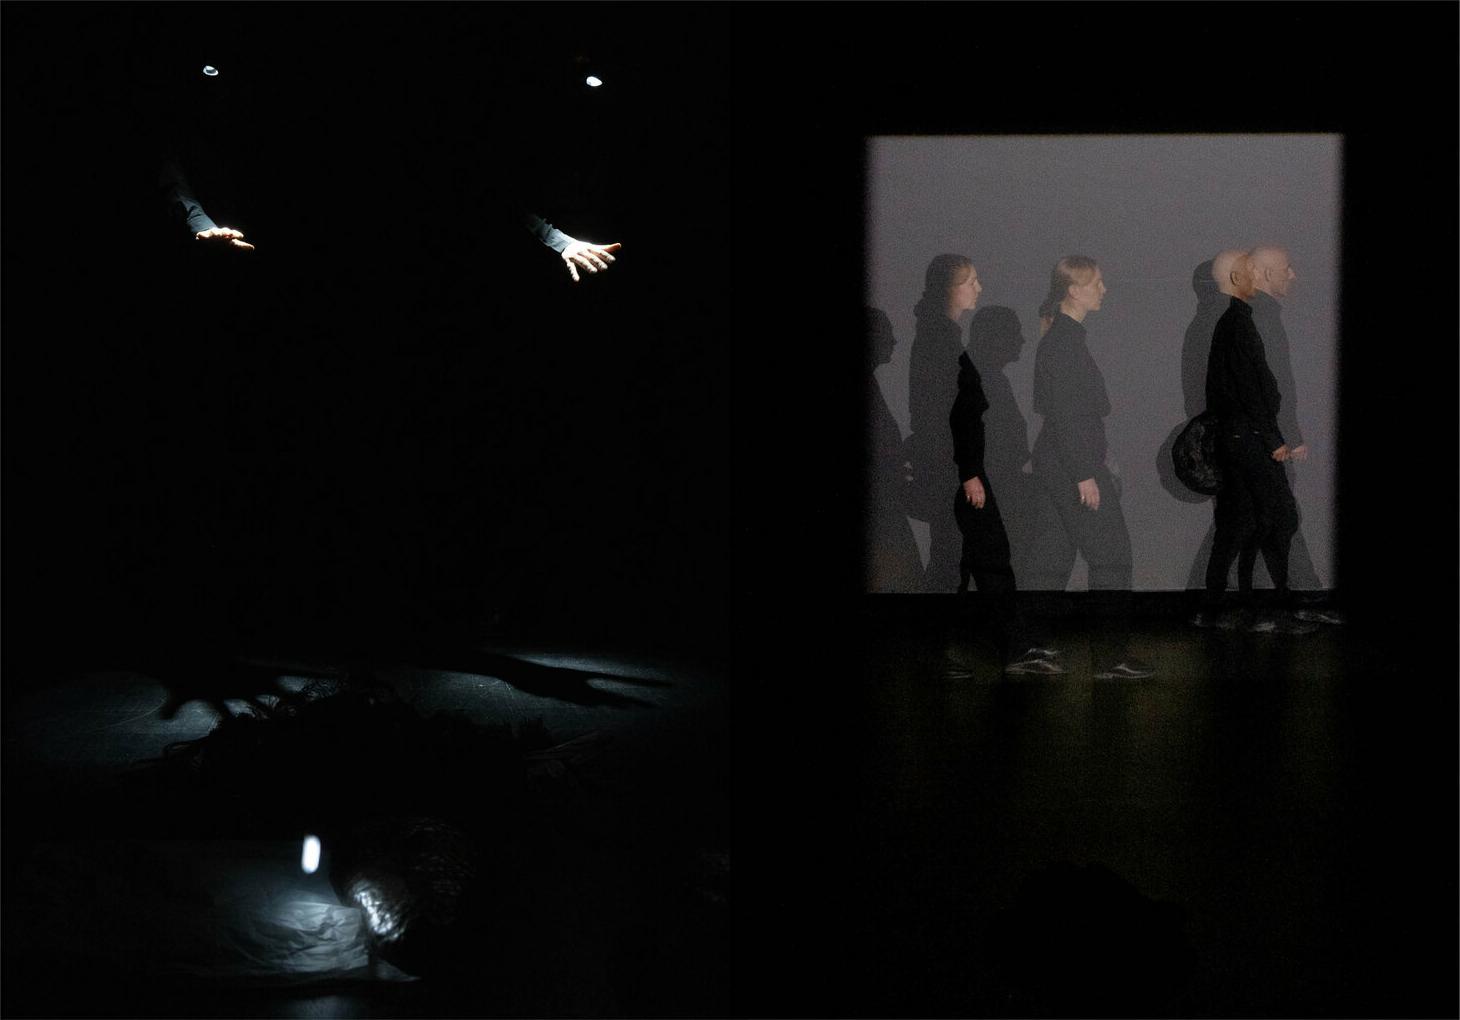 Still from 'Trust me tomorrow' showing a stage with a light on an unknown object in the foreground, two lights on disembodied hands in the back left while the back right shows two figures walking with an apparent time-lapse overlap.